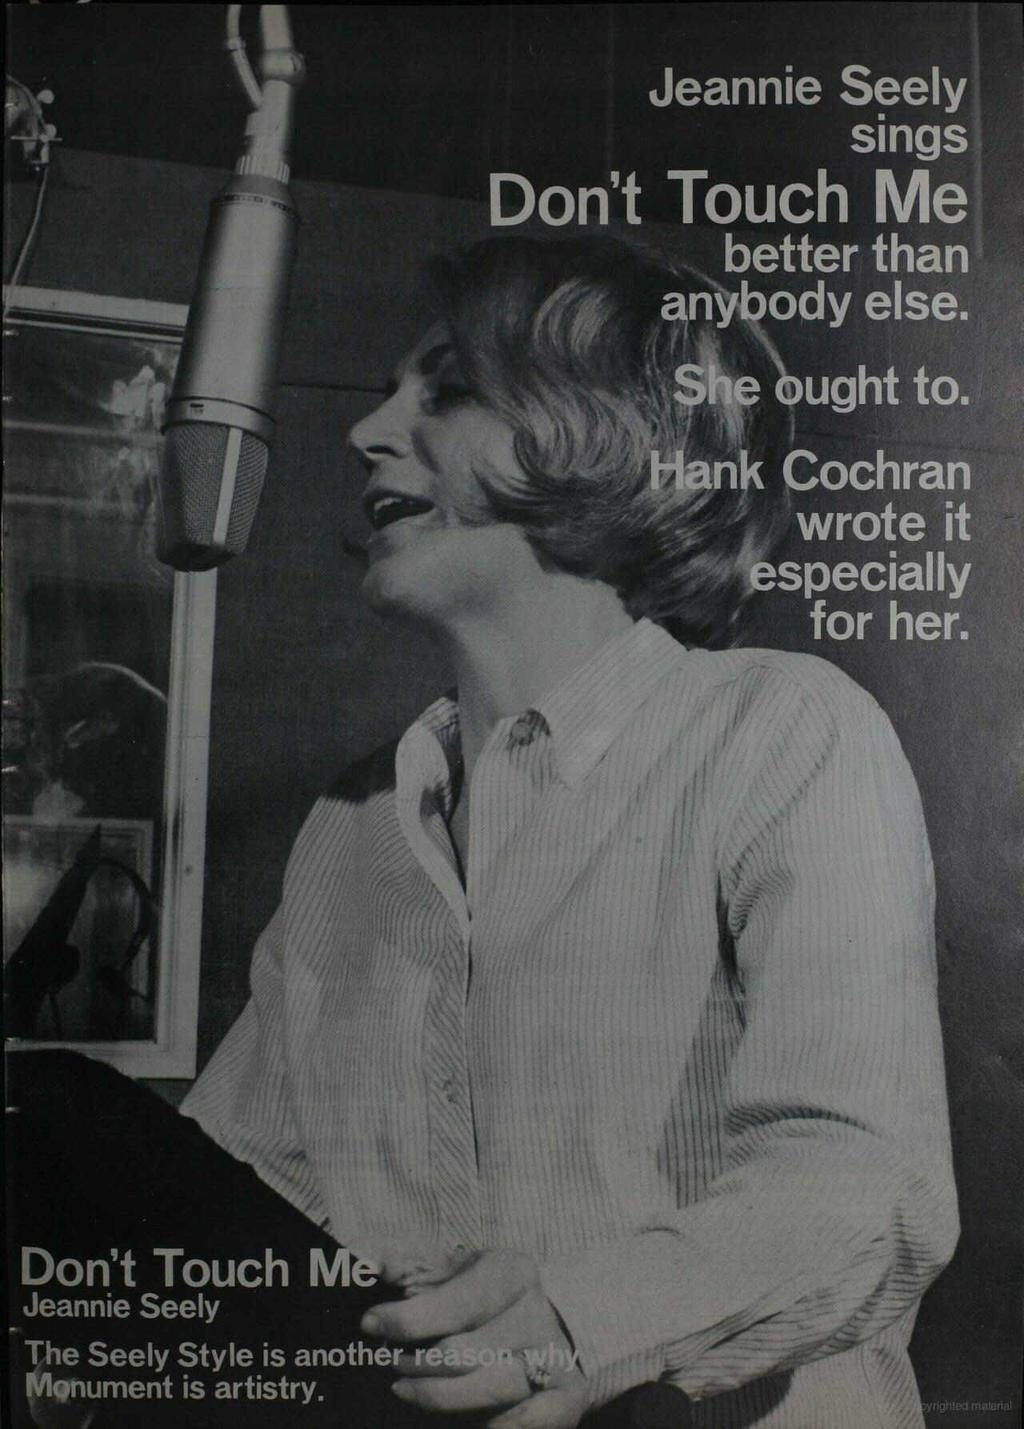 Jeannie Seely sings Don't Touch Me better than anybody else. 4.4 ought to.